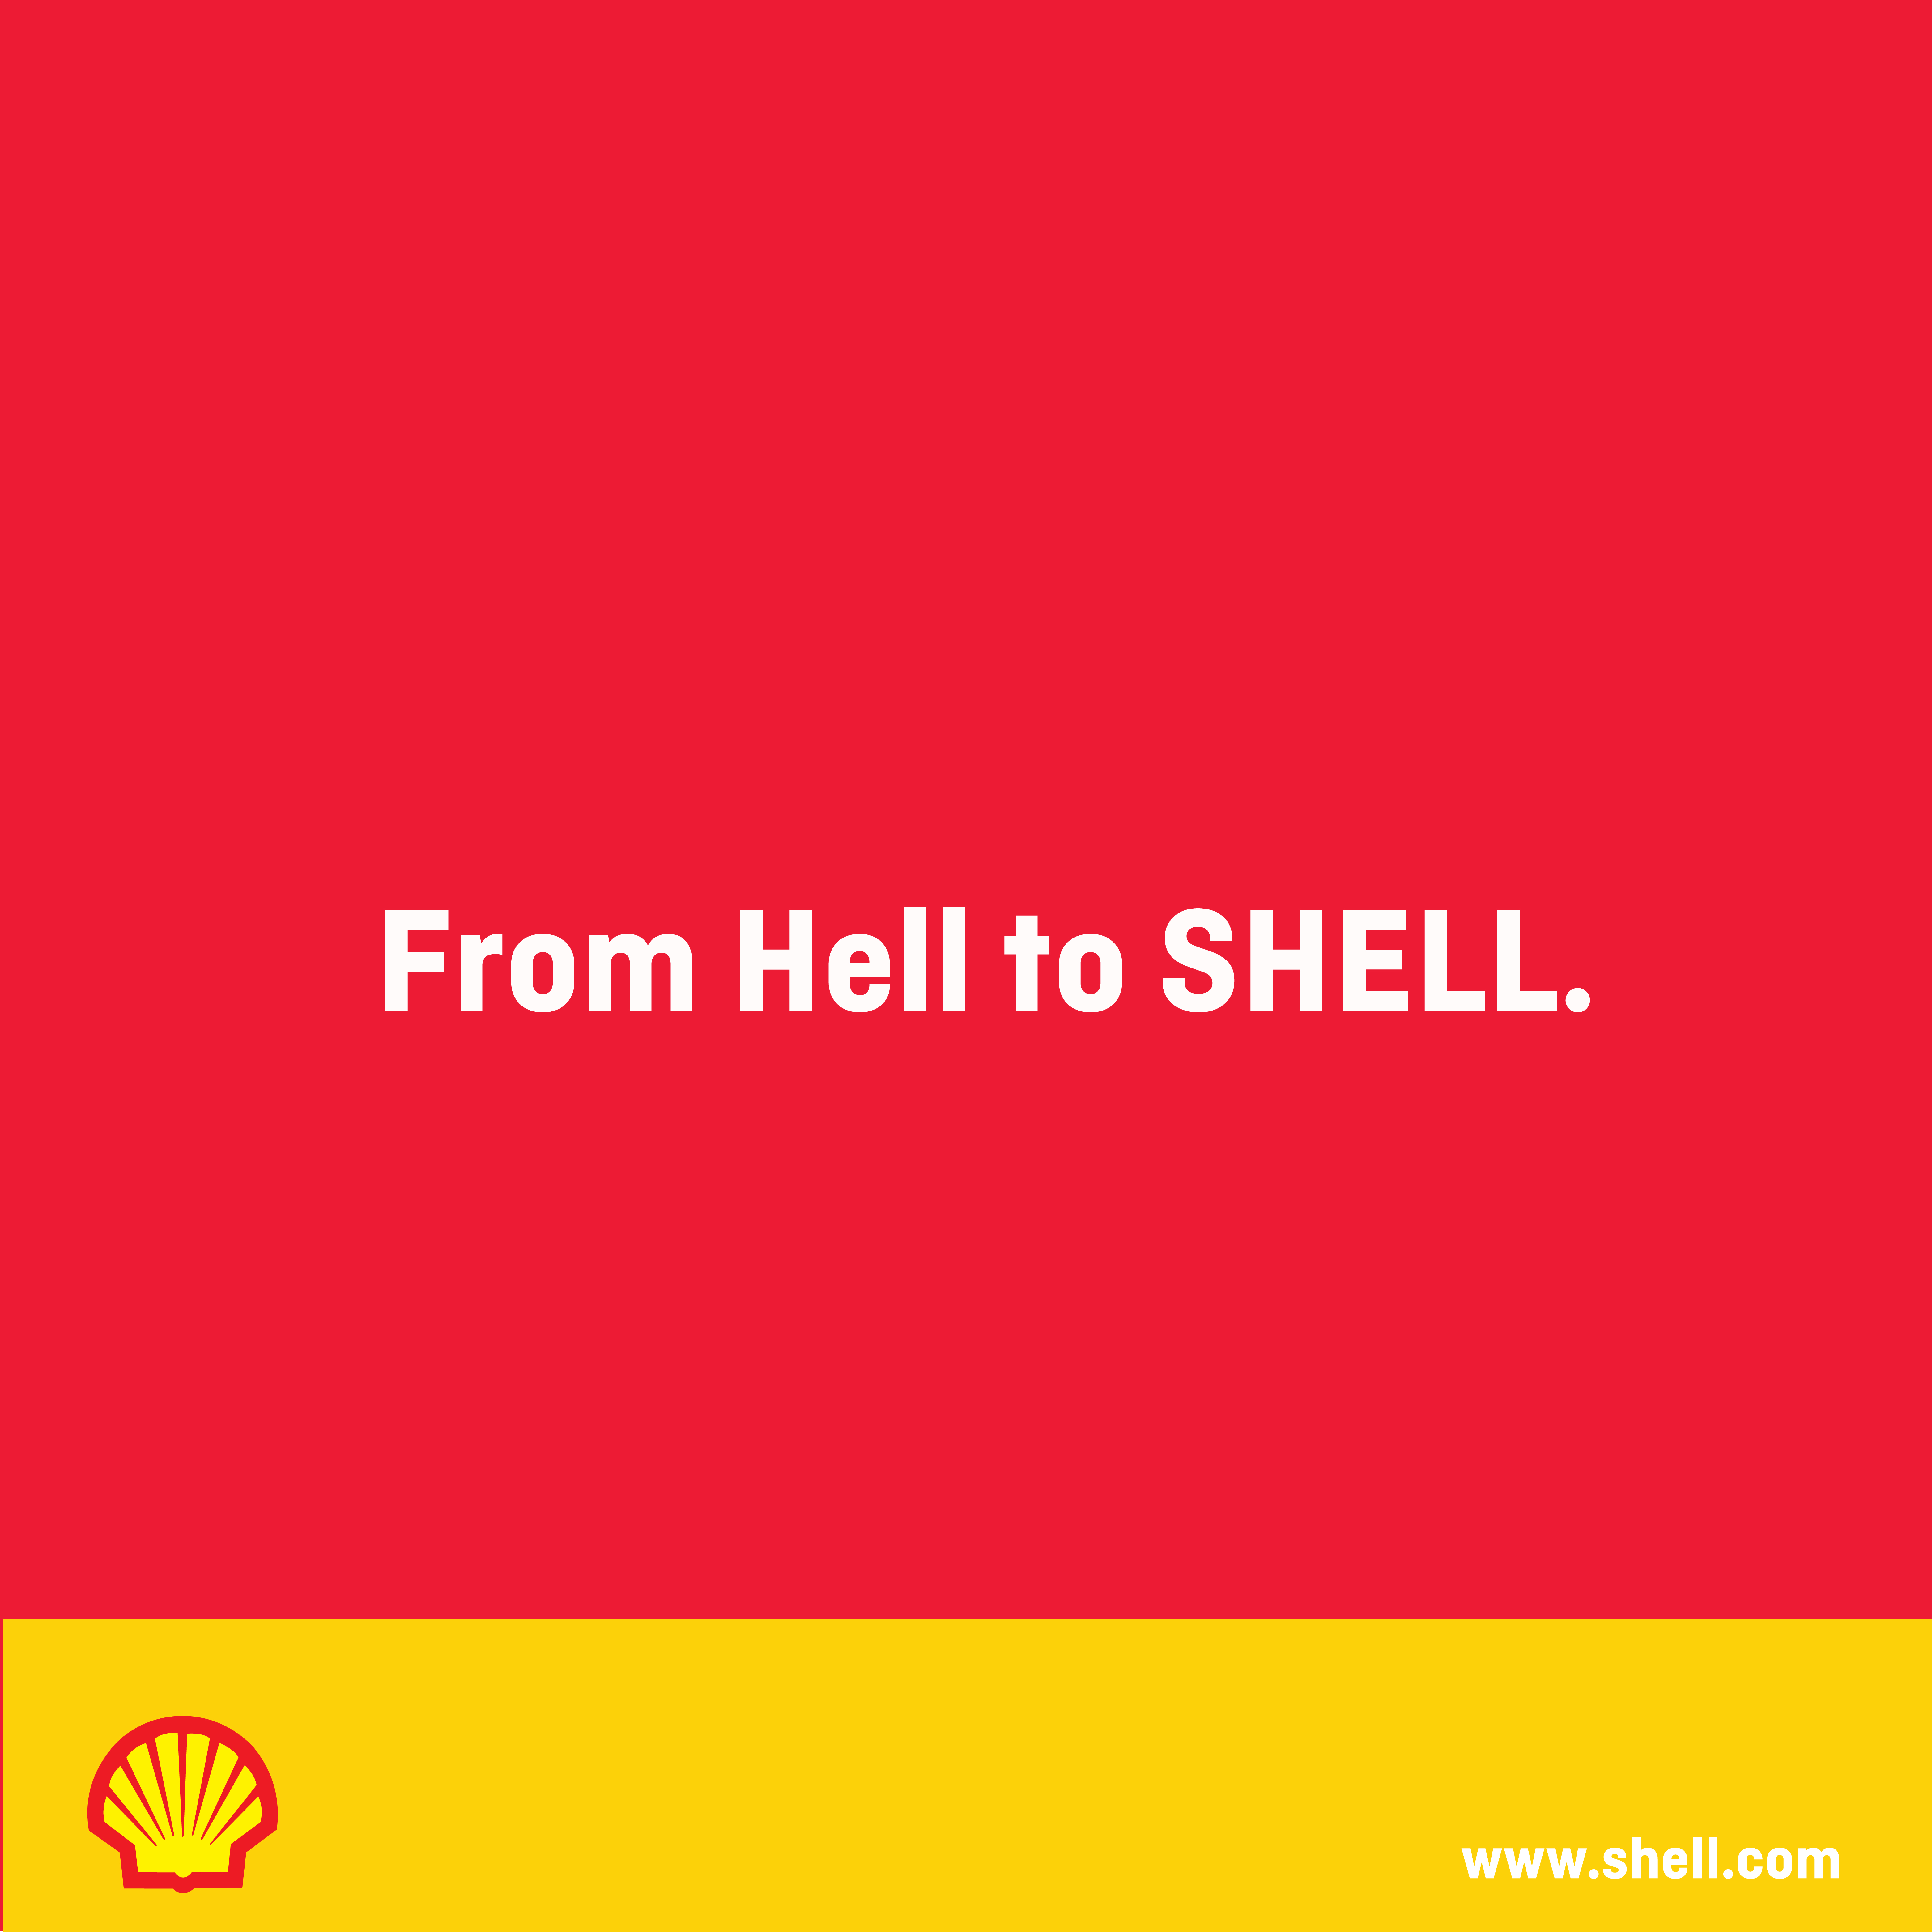 Shell Print Advert By University AAB: From Hell to SHELL, 5 | Ads of ...